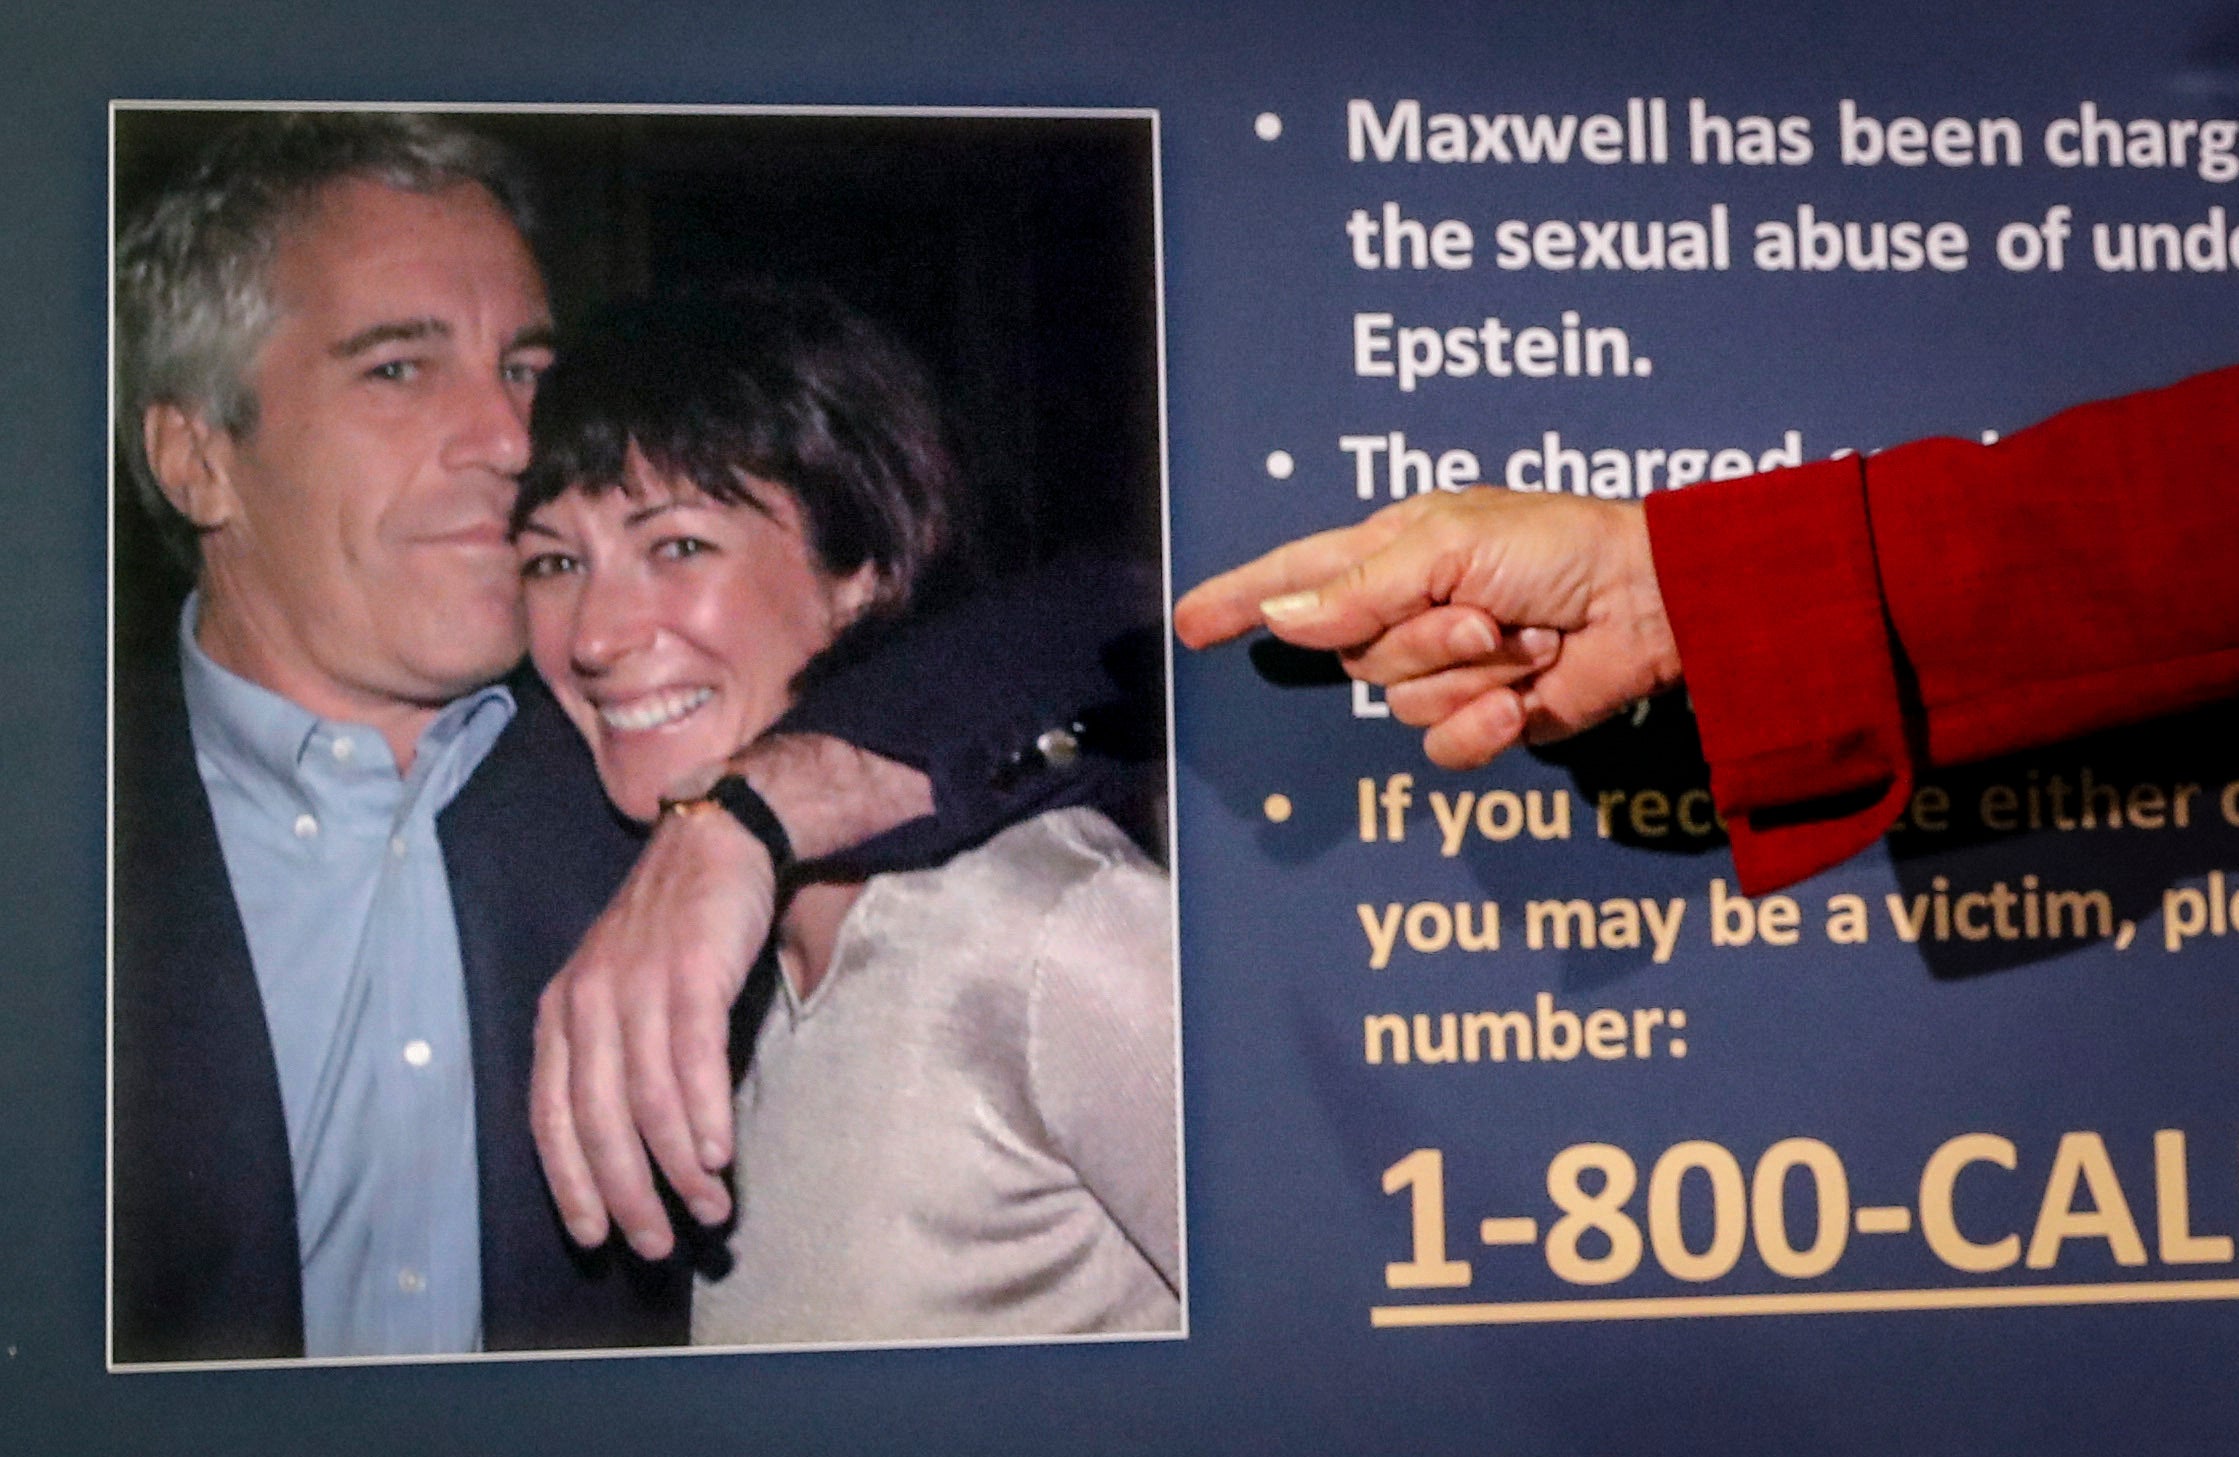 Jeffrey Epstein and Ghislaine Maxwell have been accused of working together to procure and groom teenage girls